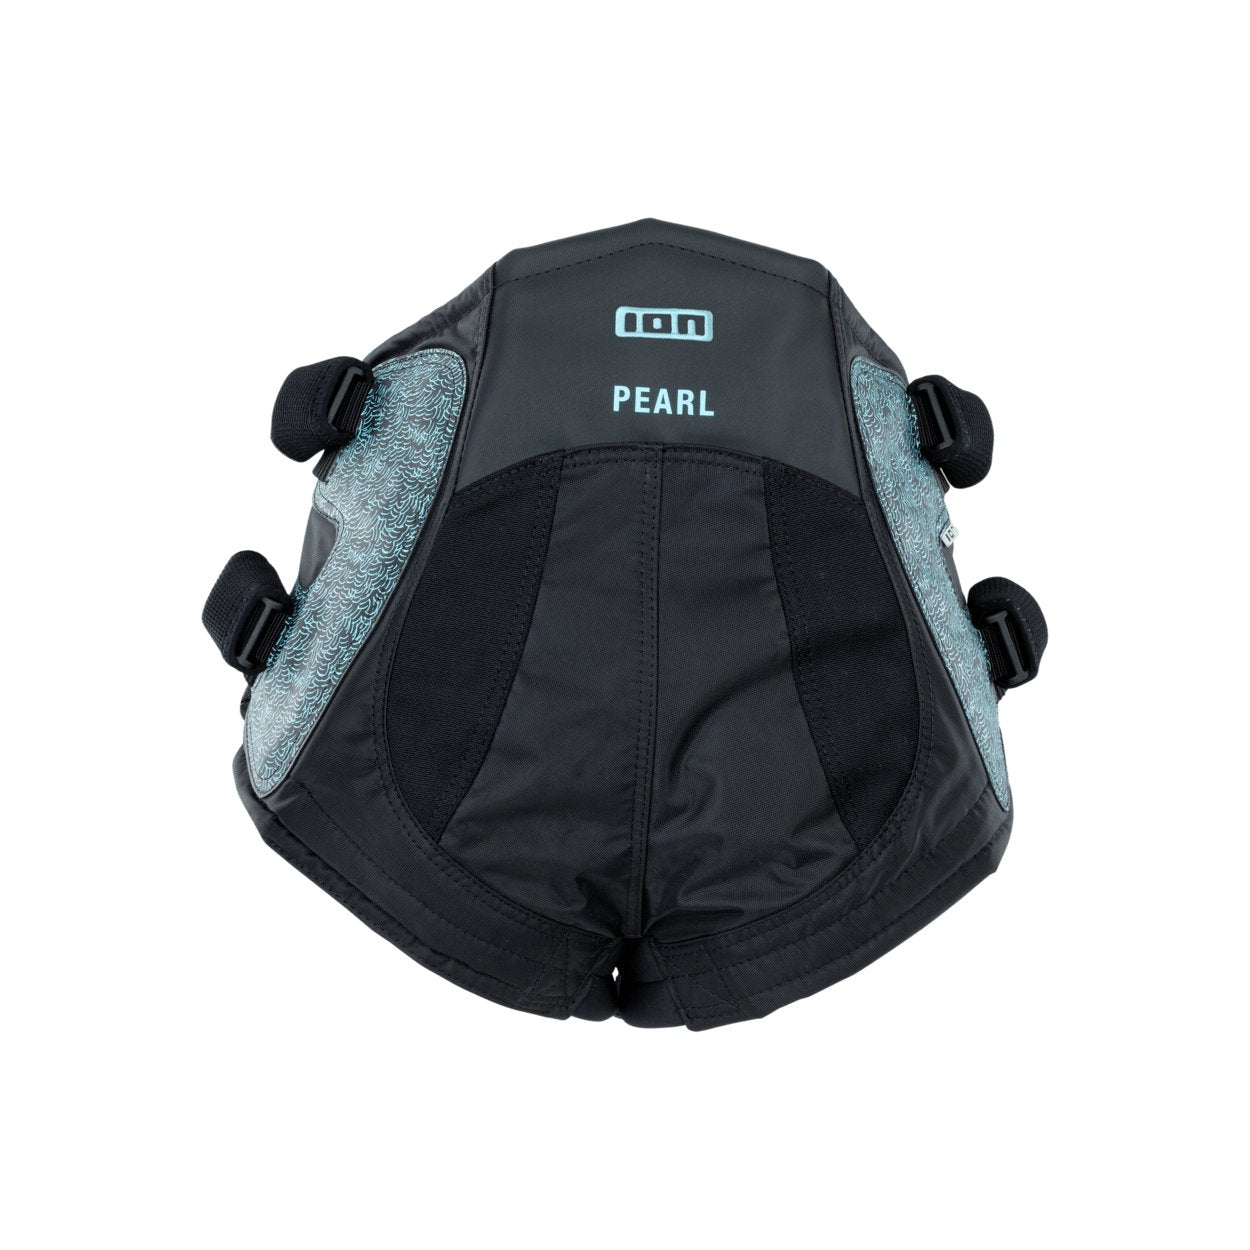 ION Pearl Windsurf Seat Harness Men 2022 - Worthing Watersports - 9008415943128 - Harness - ION Water